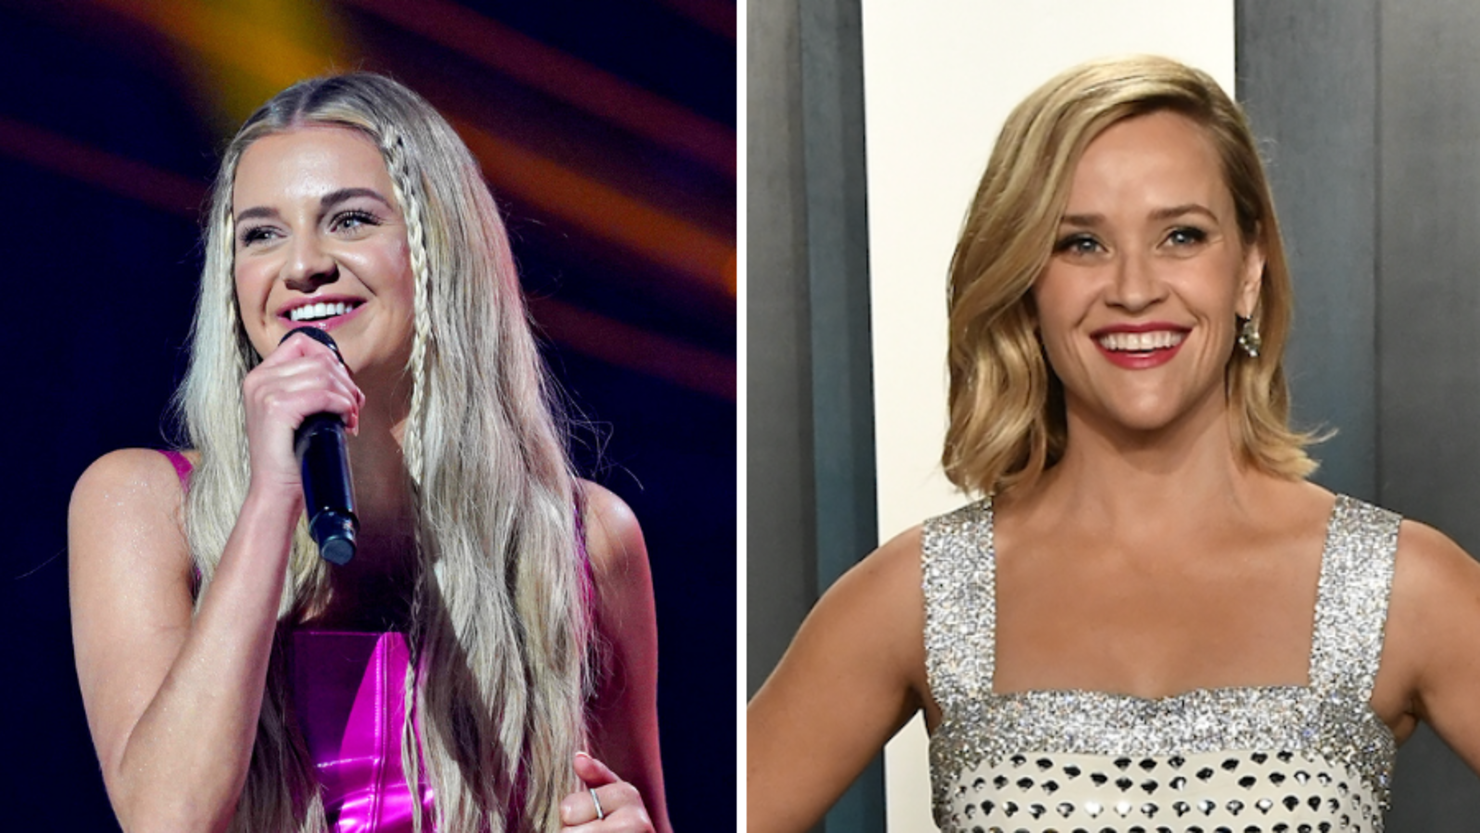 Kelsea Ballerini And Reese Witherspoon Are 'Iconic' In New TikTok | iHeart